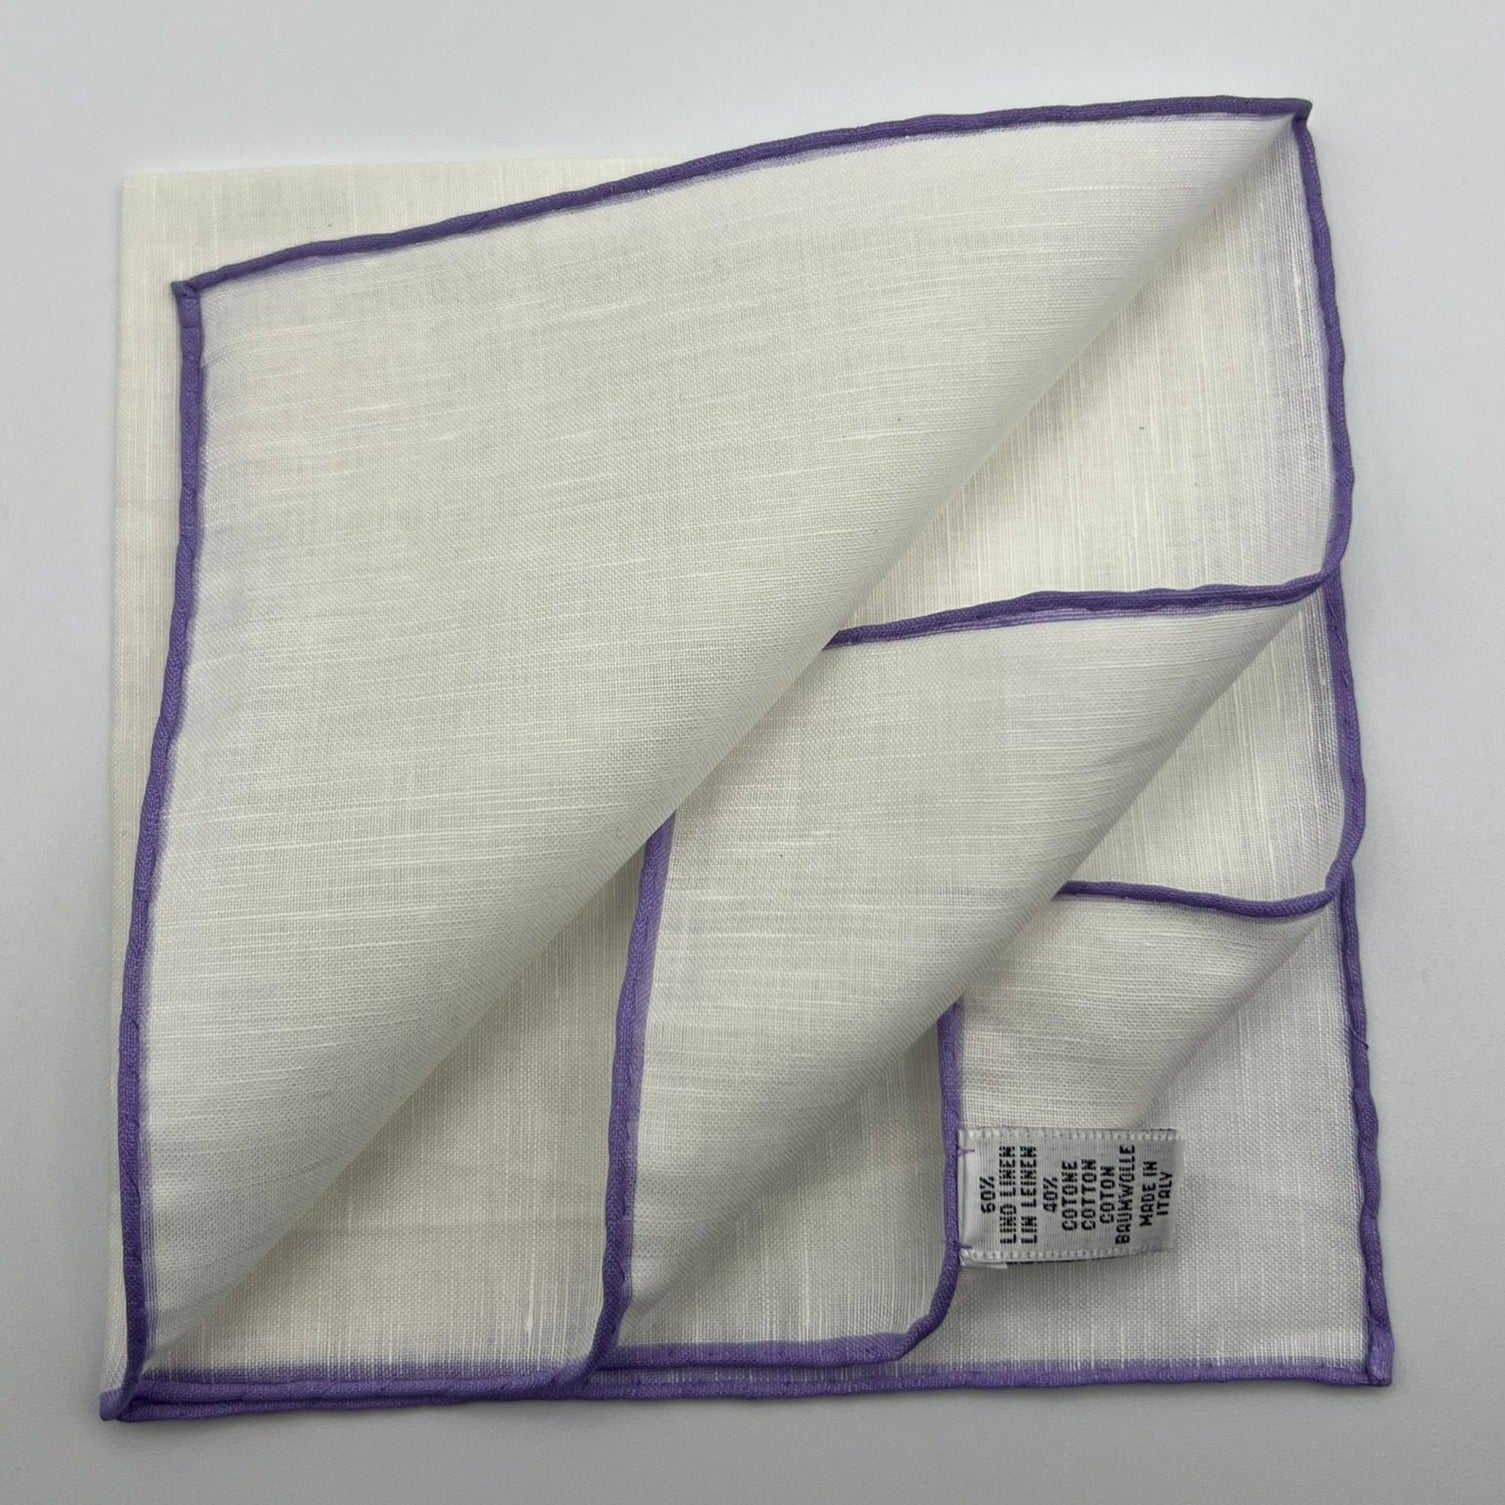 Cruciani & Bella 60%Linen 40% Cotton Hand-rolled  -  Pocket Square White and Liliac Handmade in Italy 33 cm X 33 cm #7524